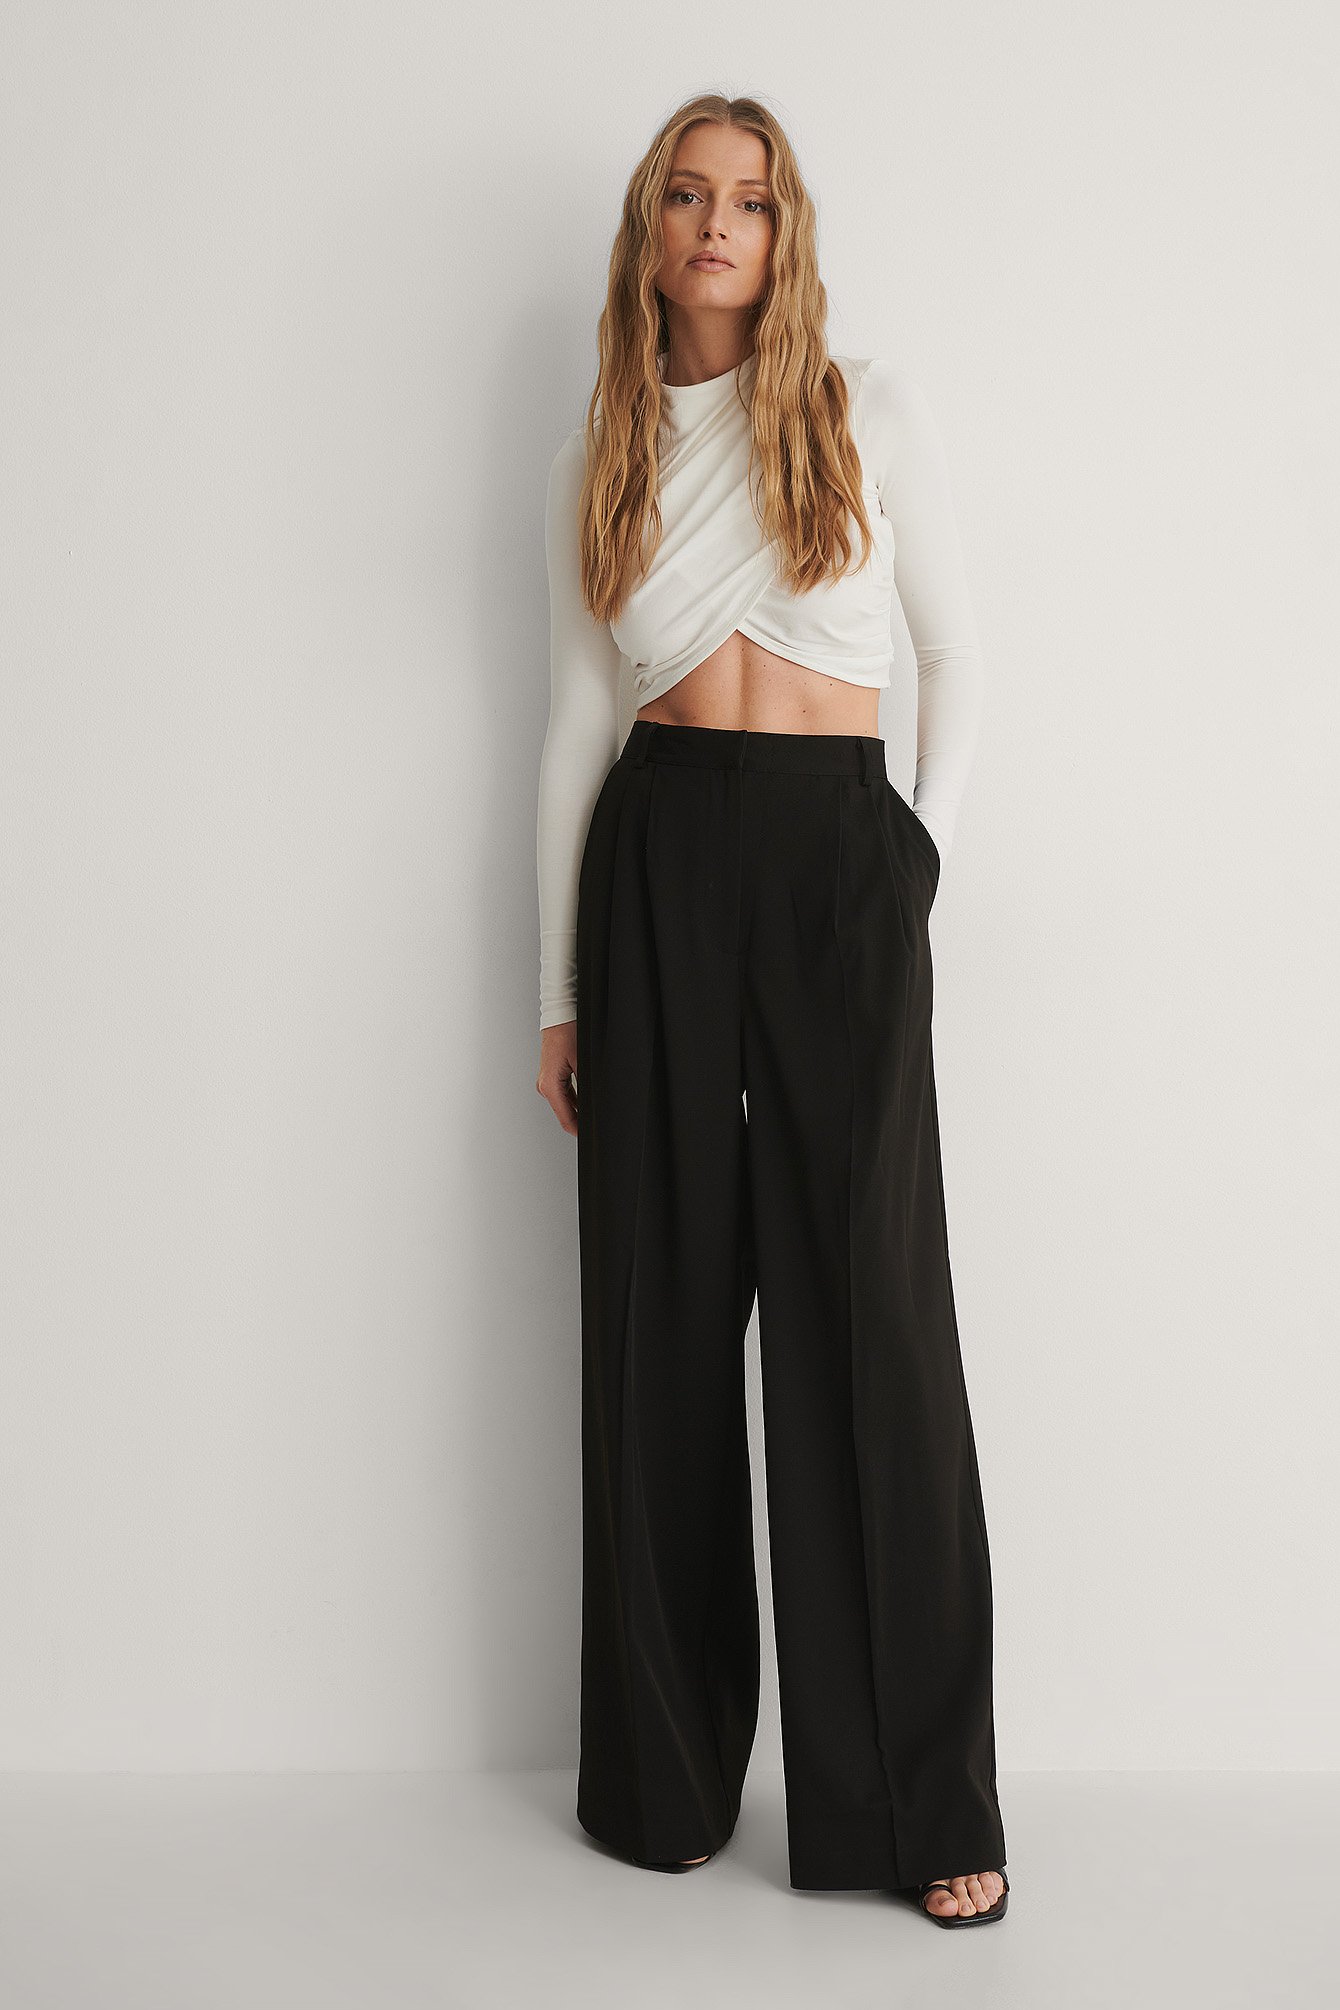 Cropped Pleated Top Outfit.